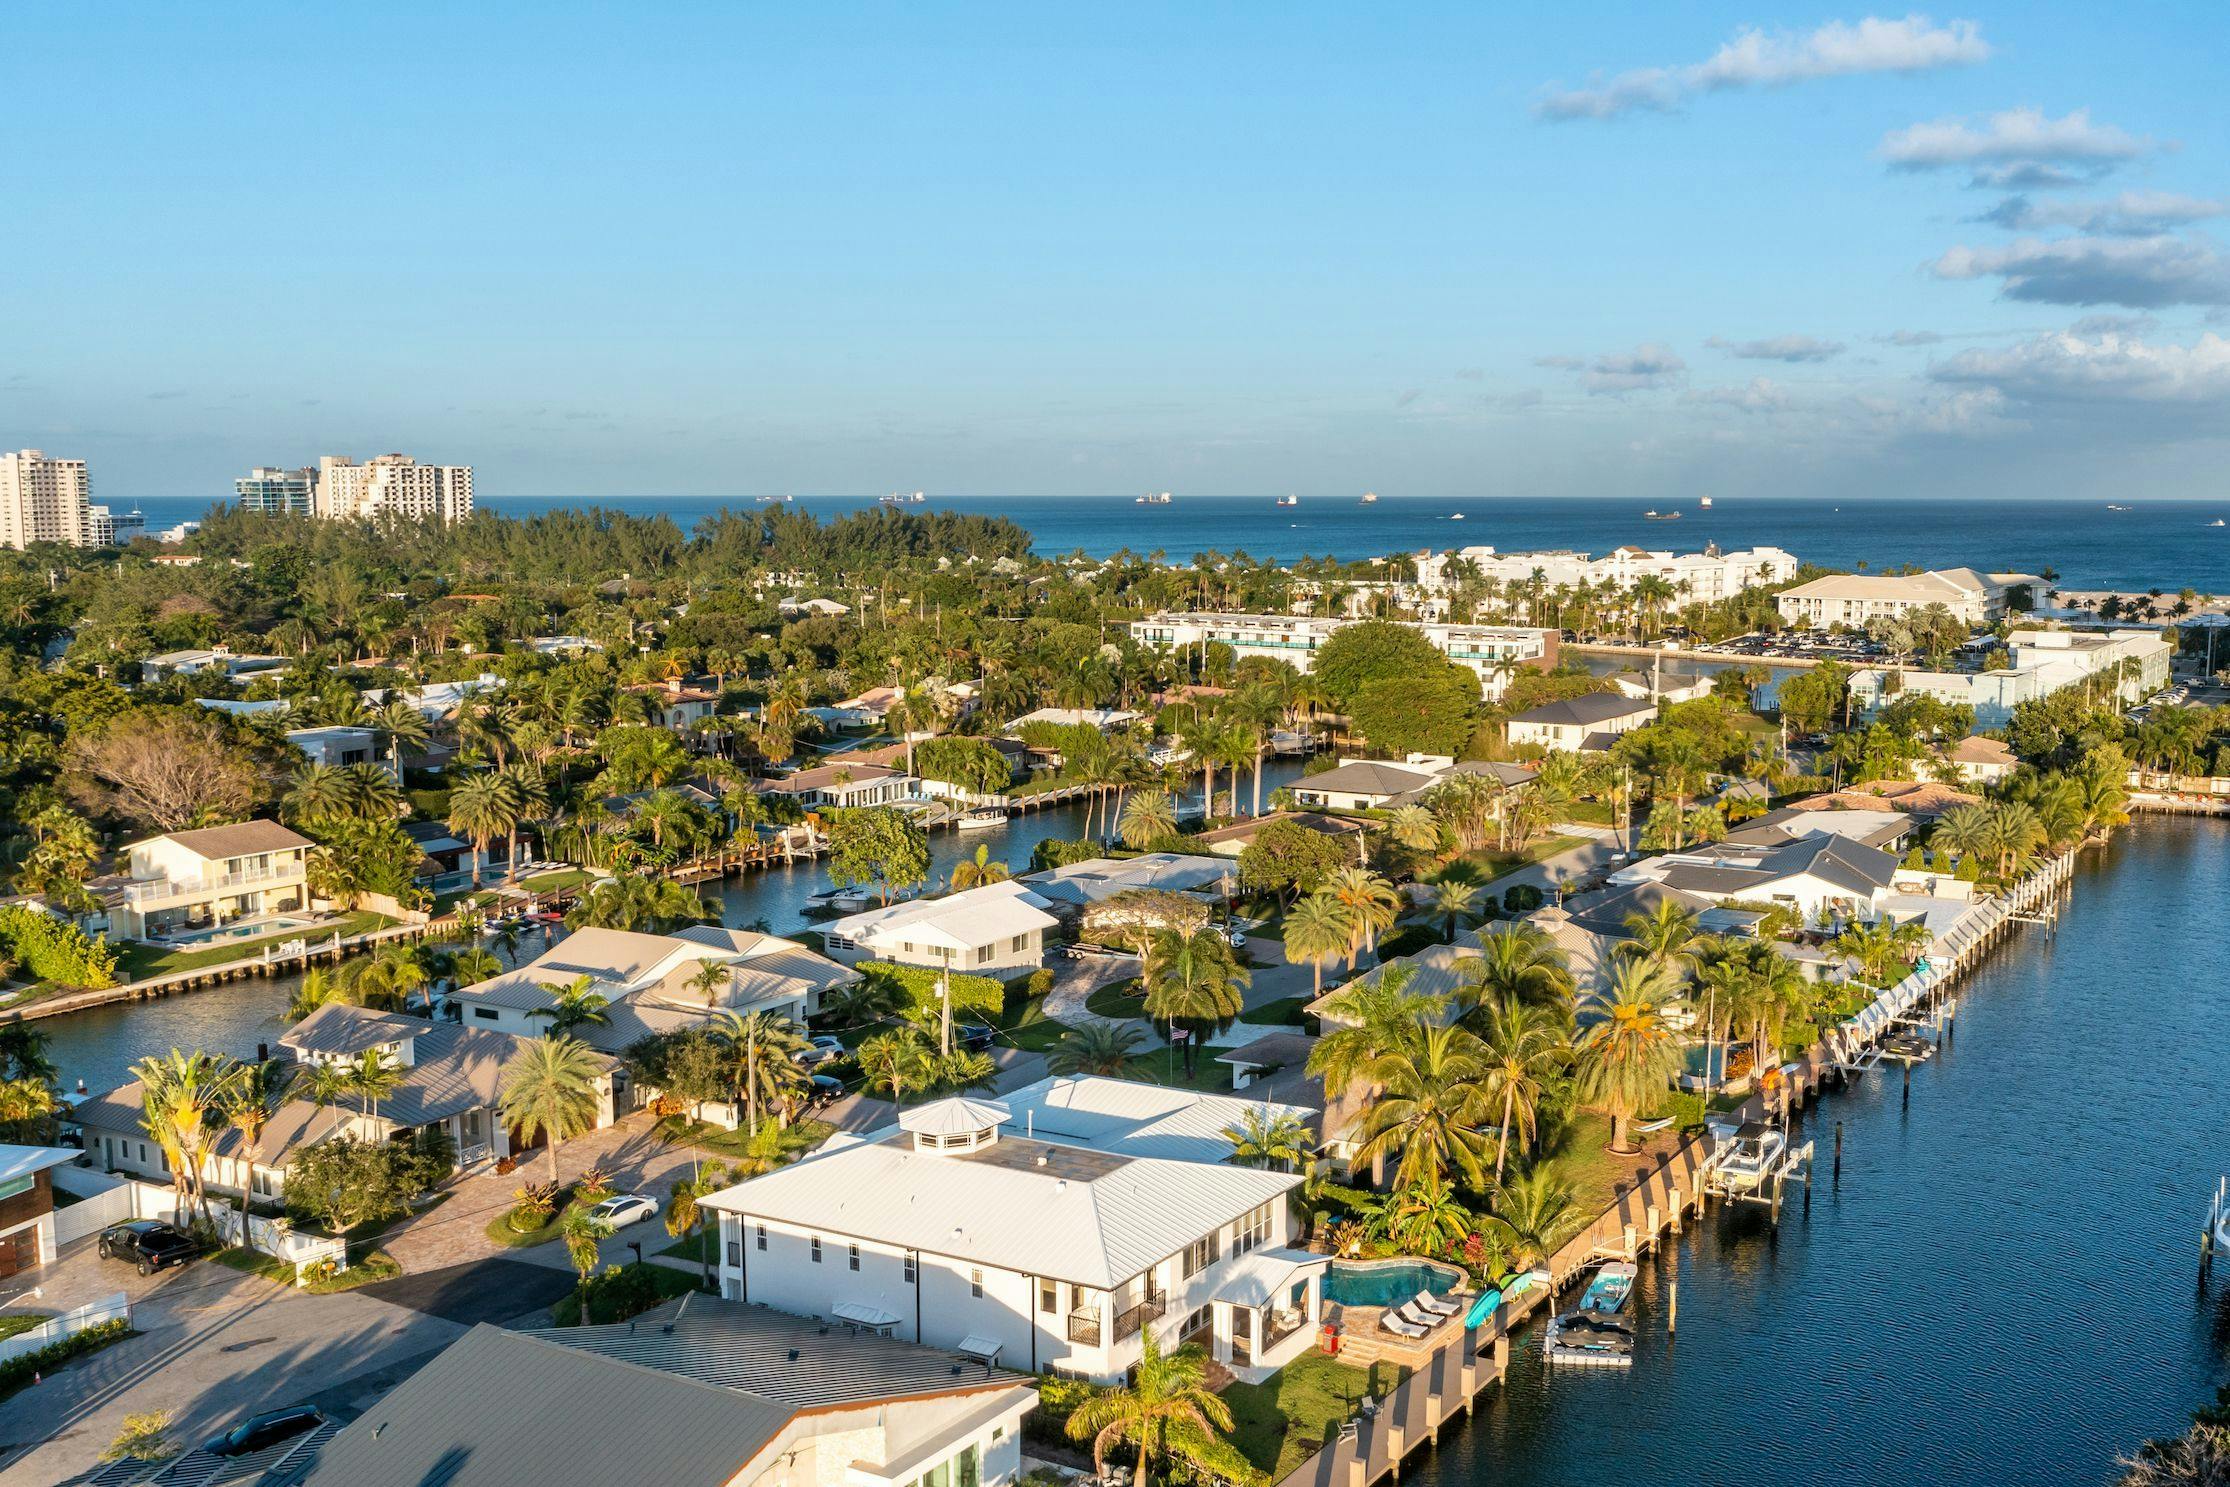 Enjoy a Relaxing Vacation in Ft. Lauderdale with Vacation Rentals